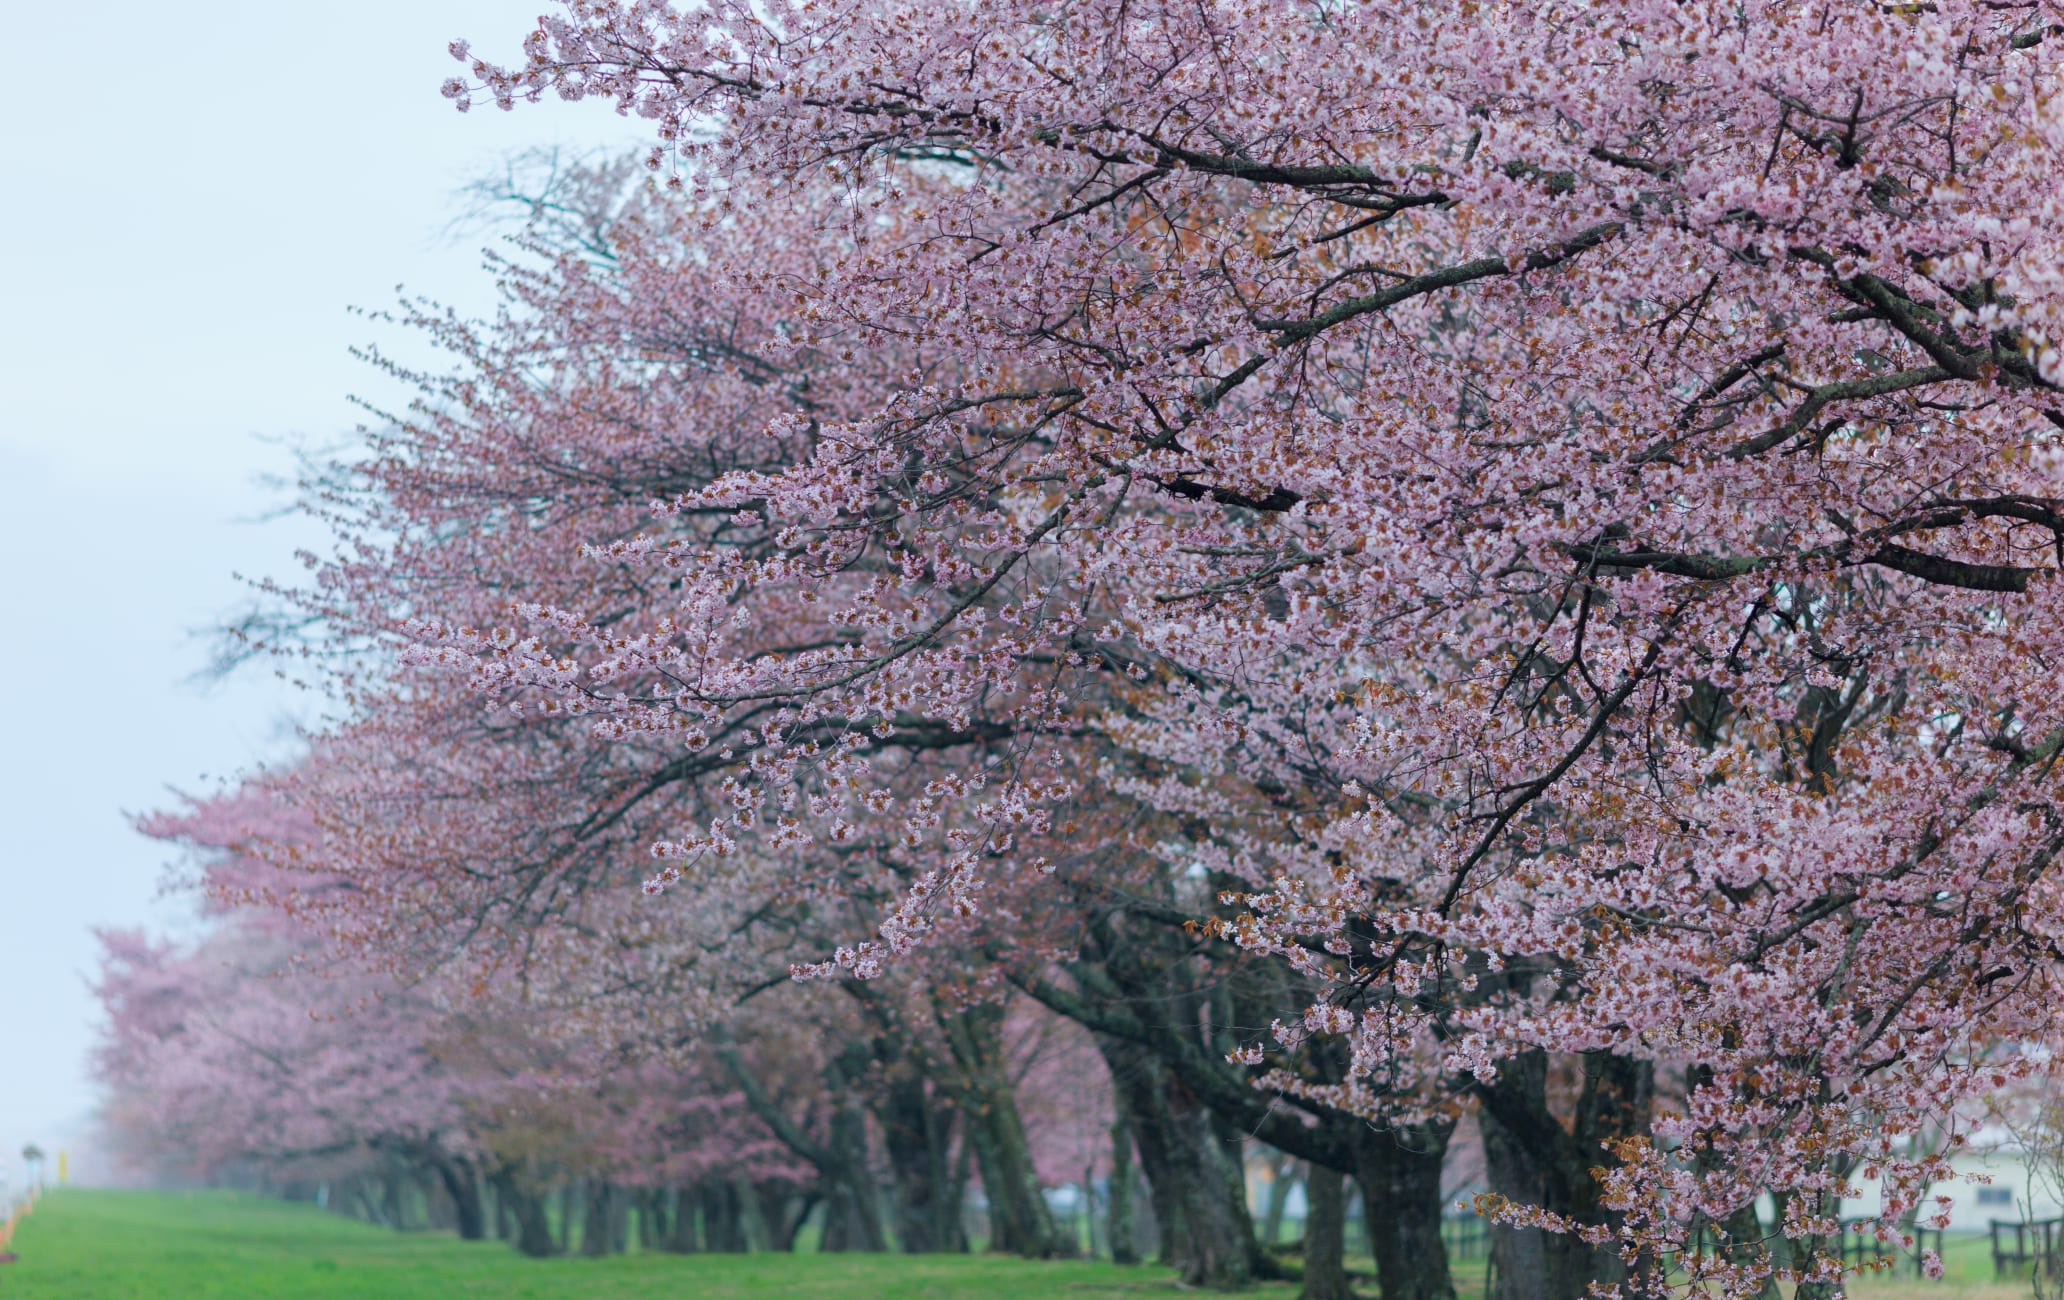 Cherry Trees lined on 20-Ken Road of Shizunai